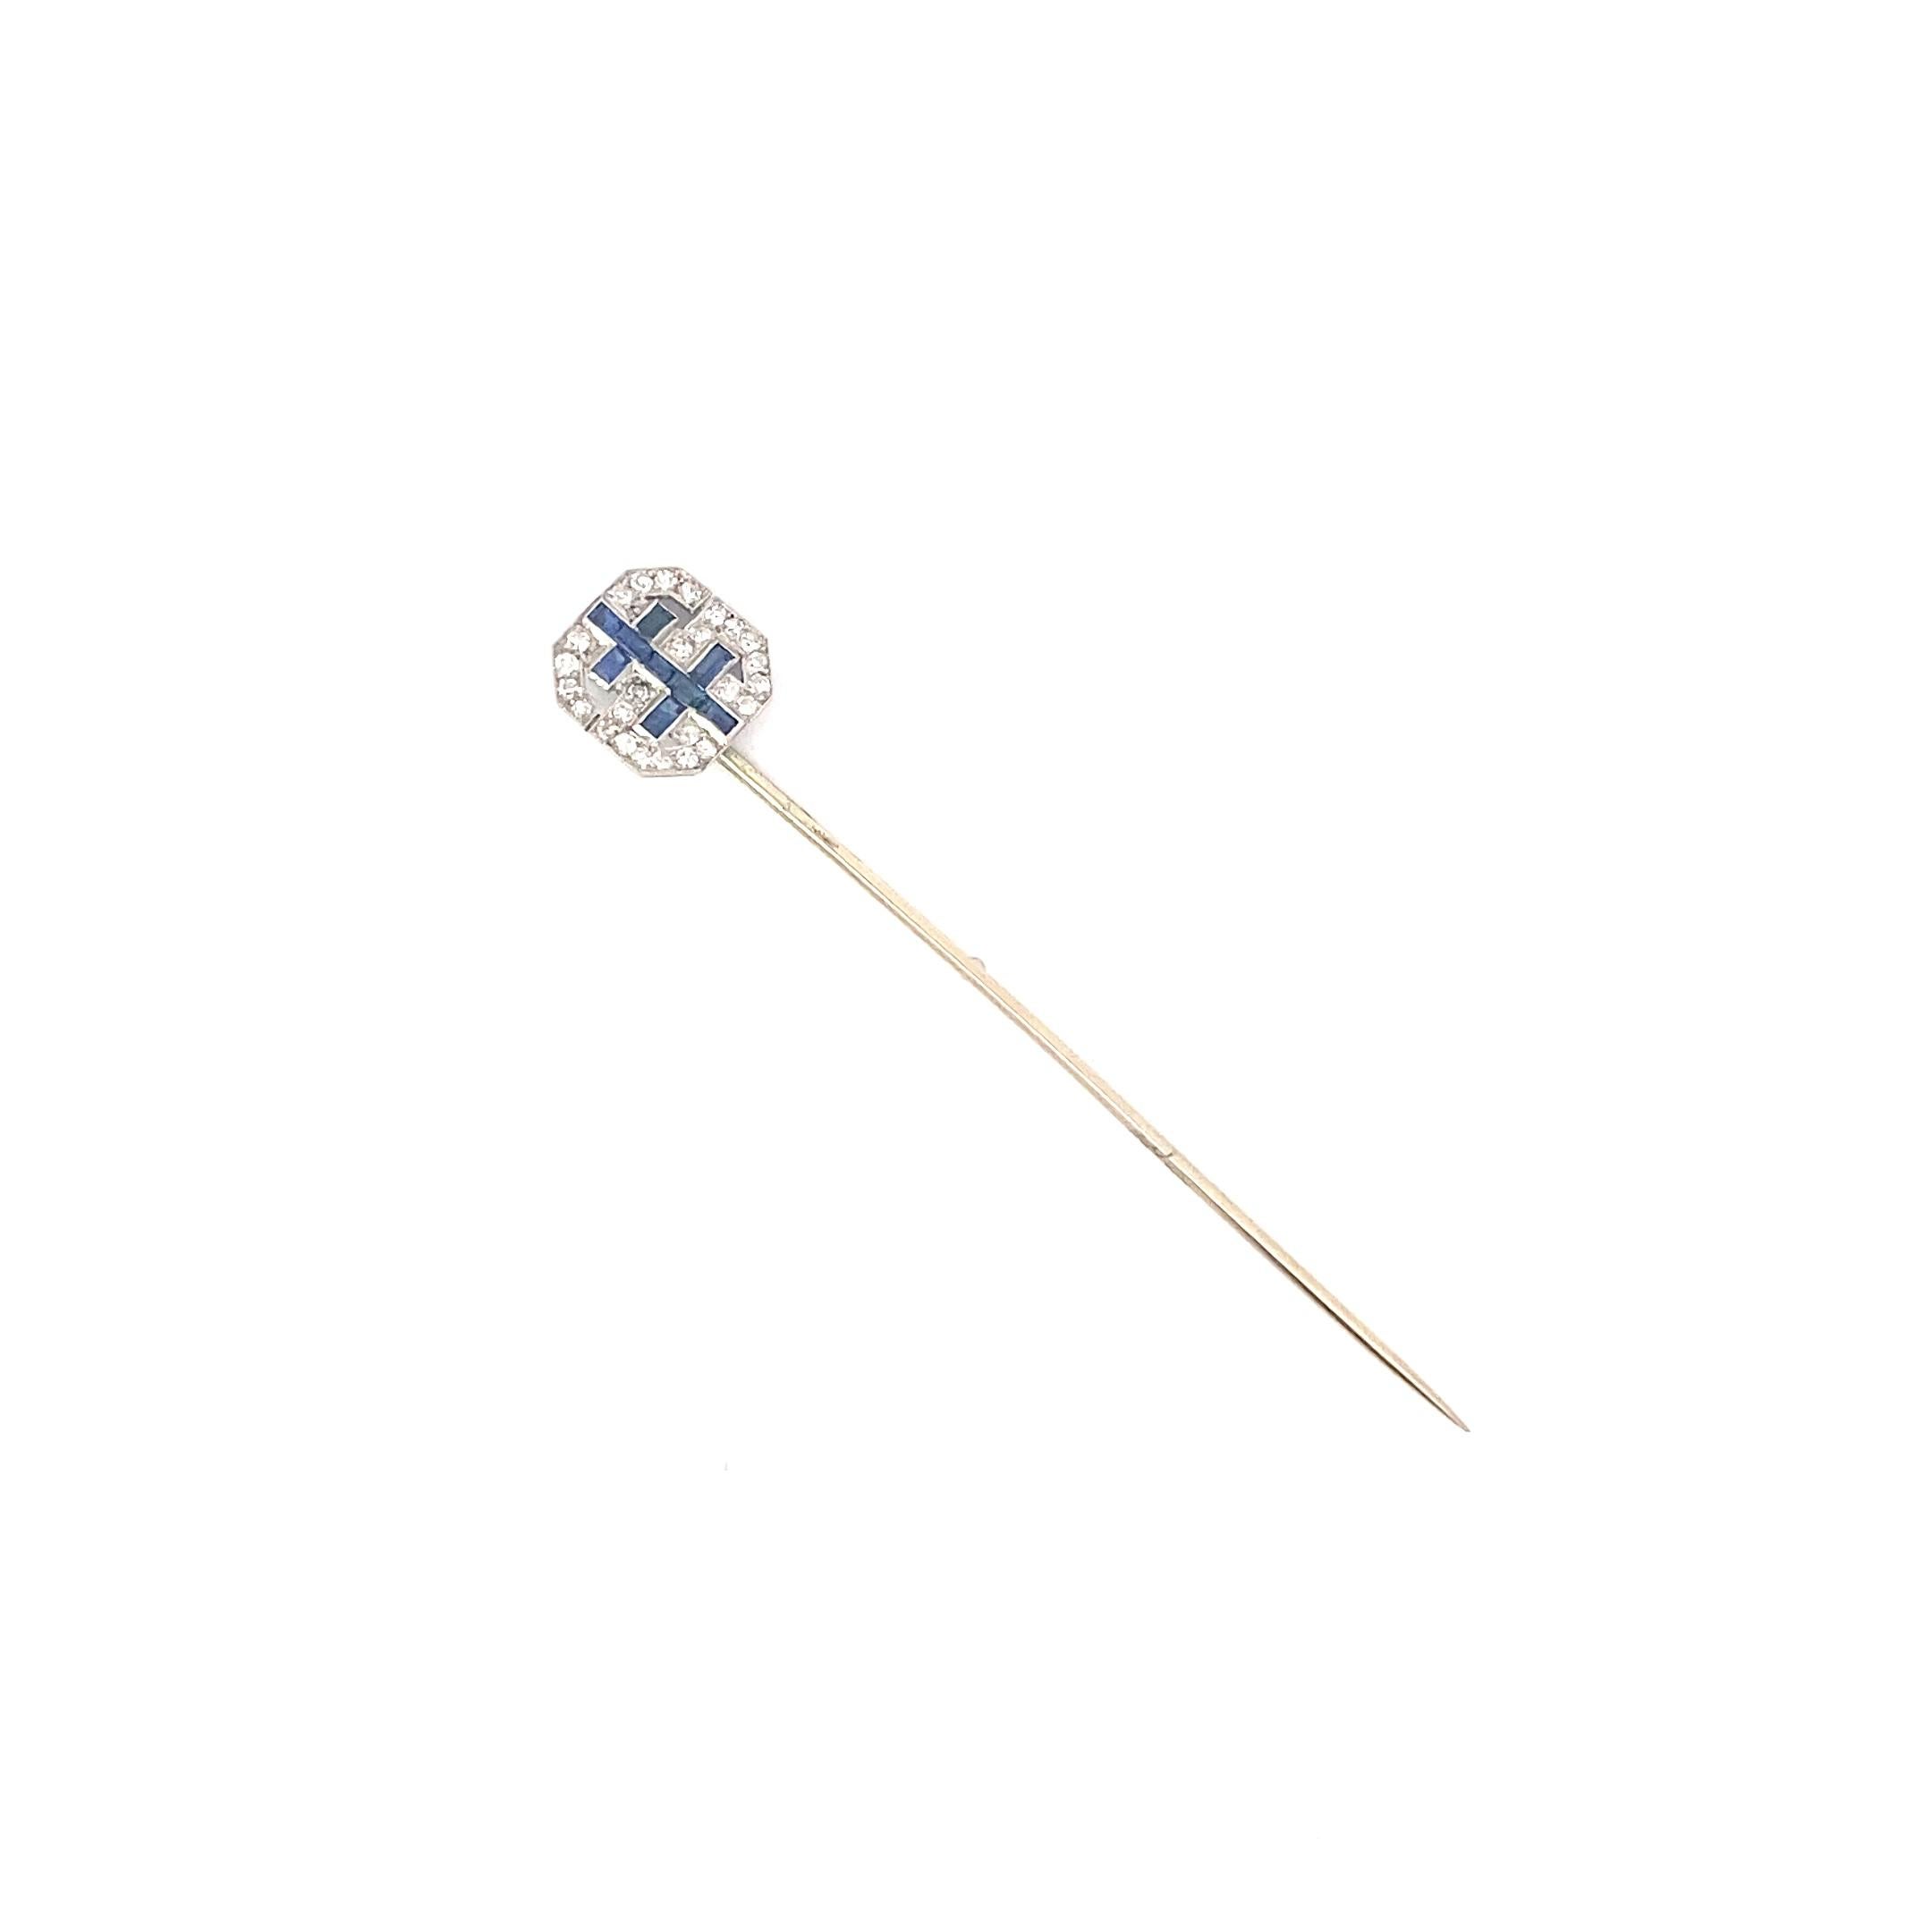 On of a Kind Stick Pin from the Early 20th century. The piece was crafted in 18k white gold featuring approximately 2.75 inches of pin for proper securing. The pave face of the pin features diamonds and sapphires in a double cross pattern. The face